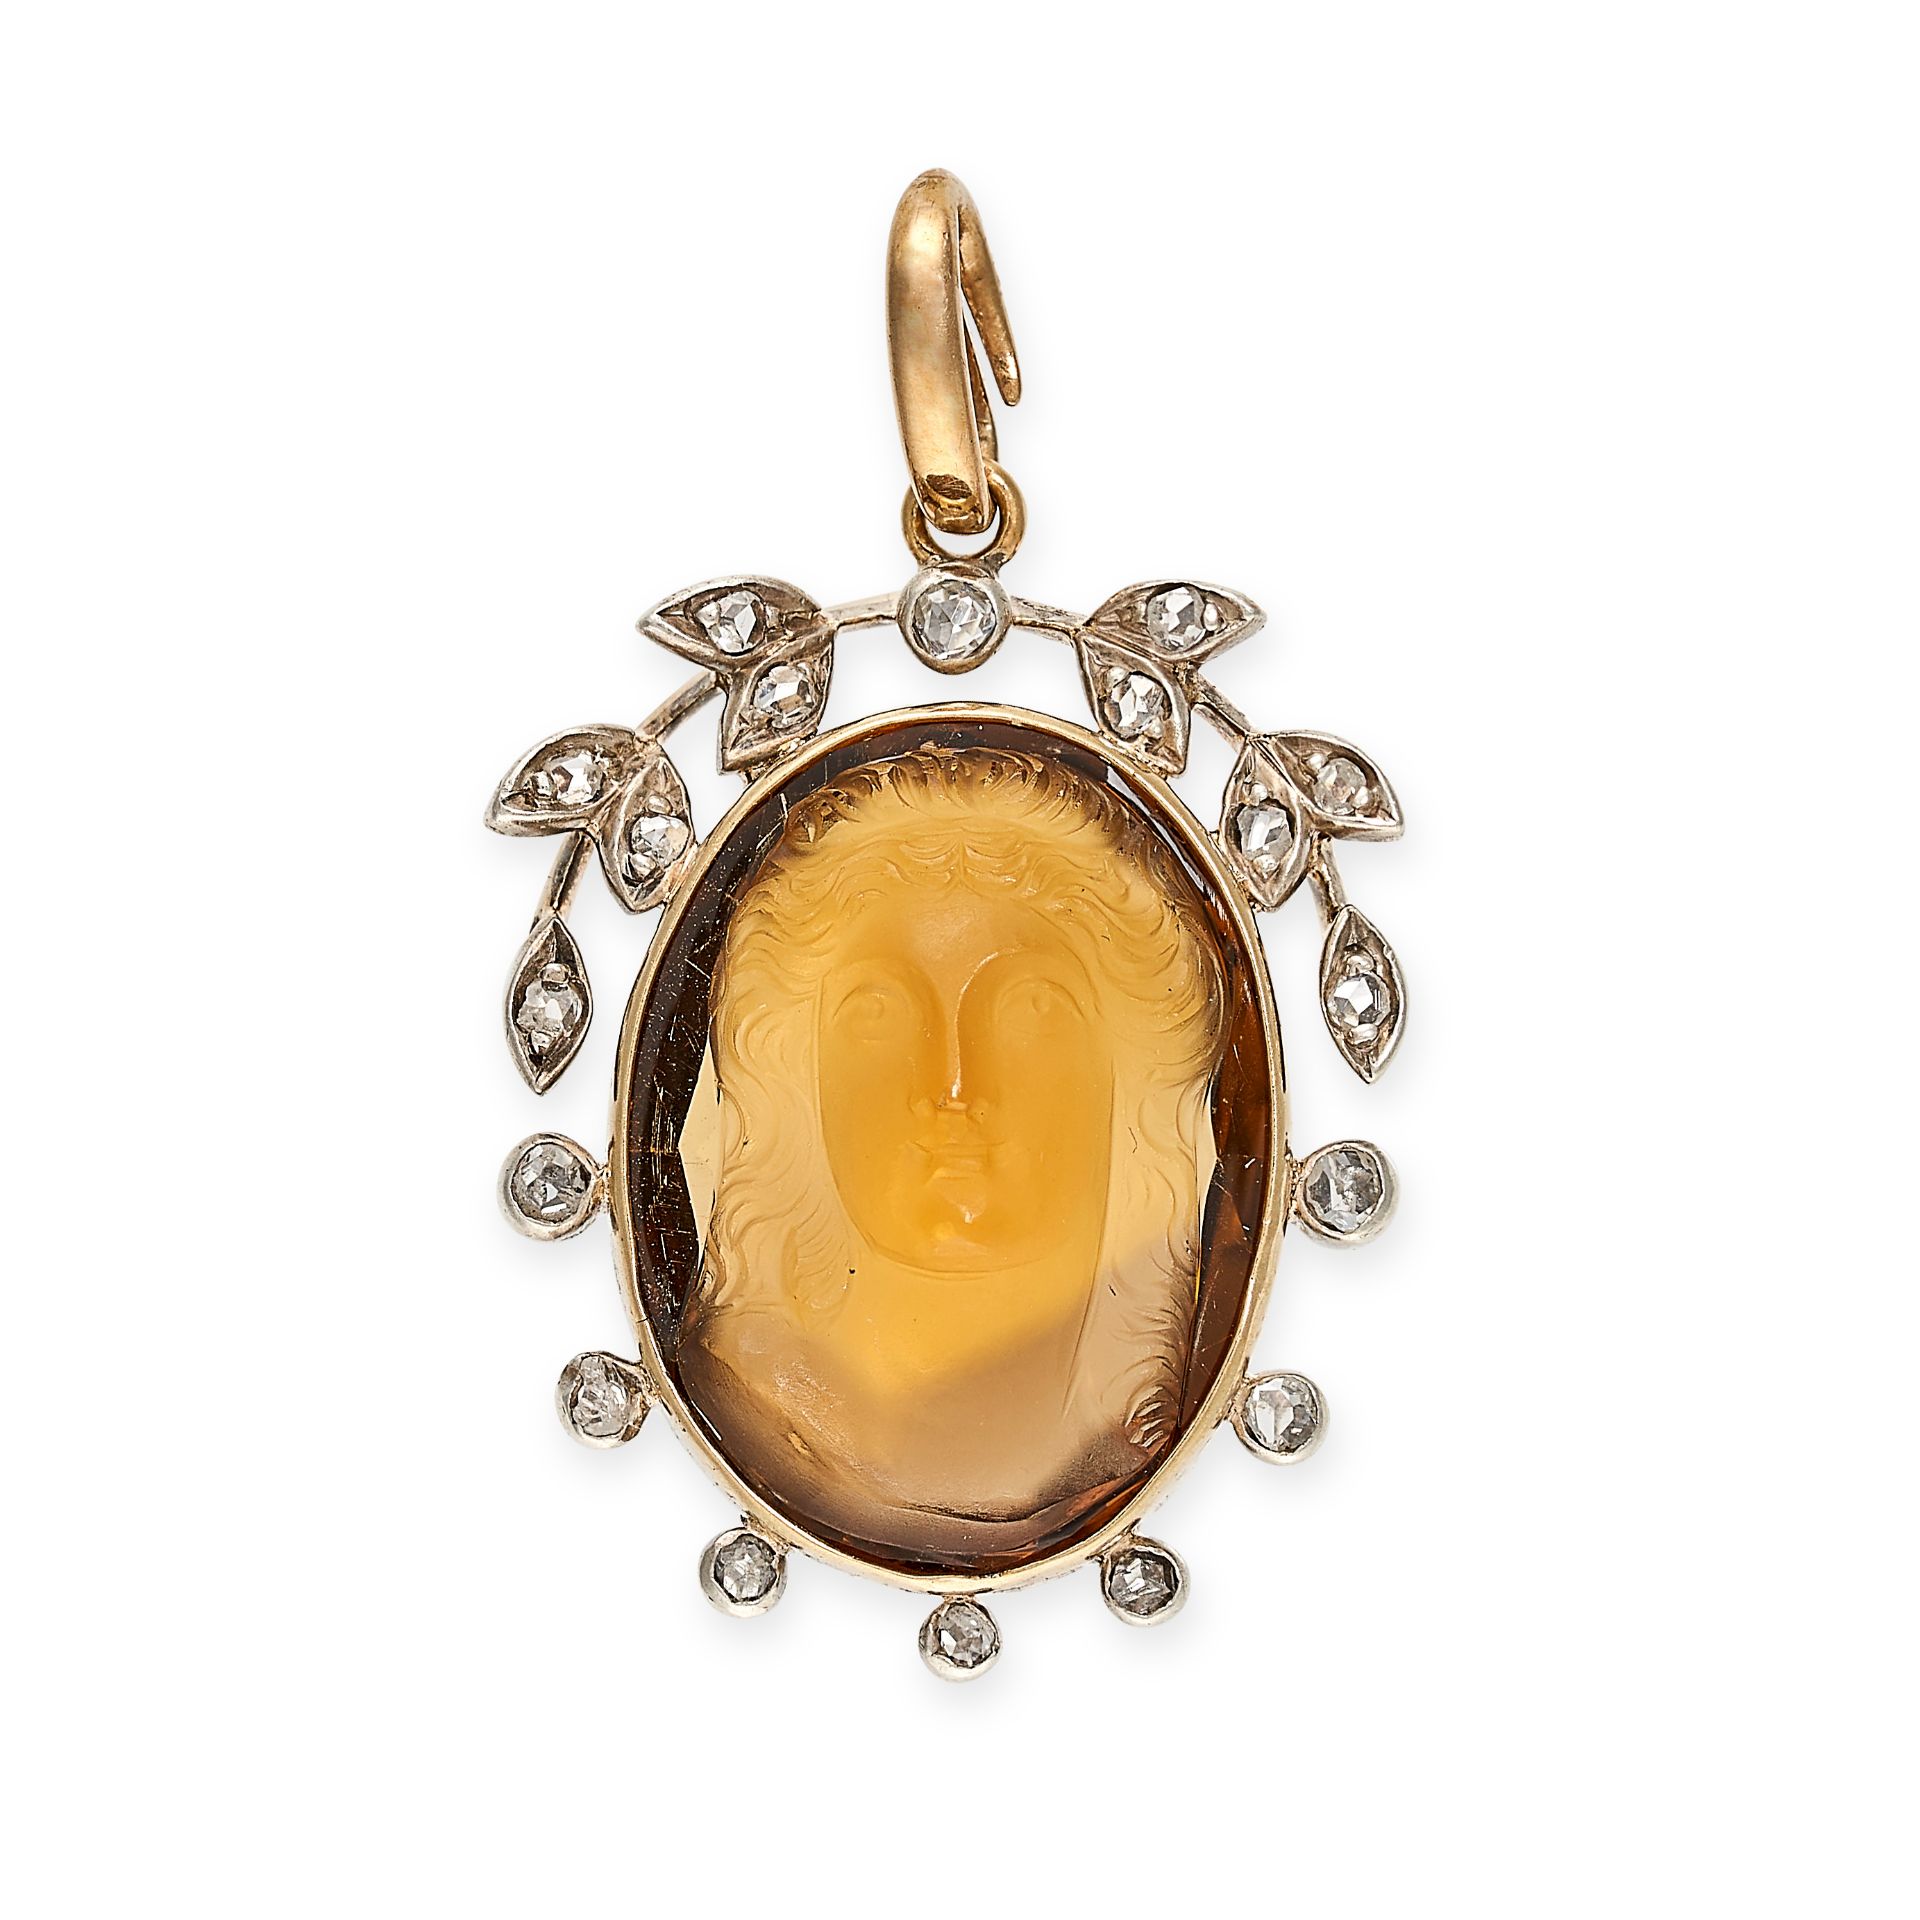 A CITRINE AND DIAMOND PENDANT in yellow gold, set with an oval citrine carved to depict the head ...